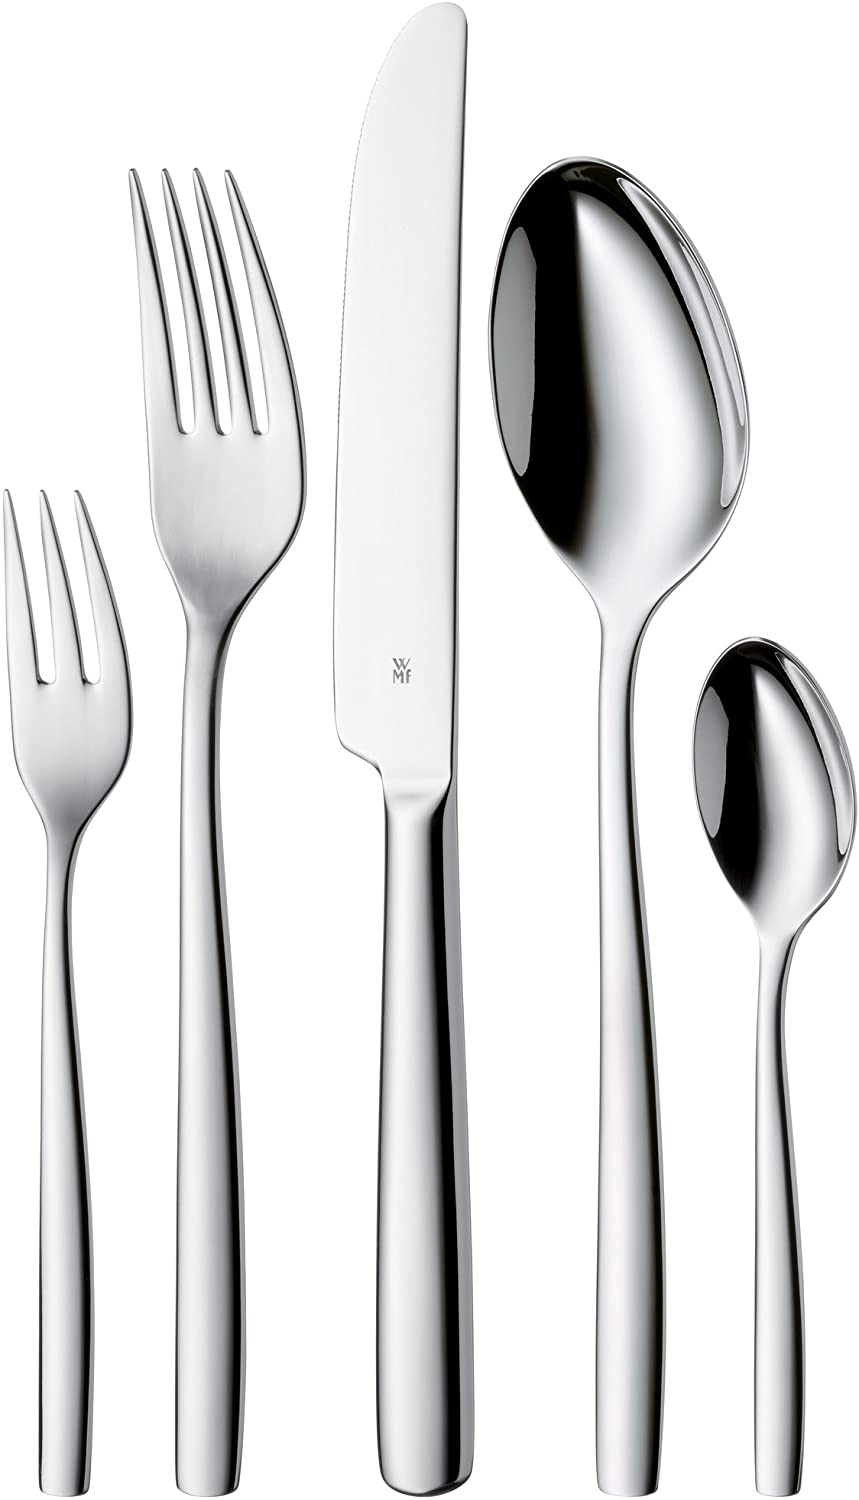 WMF Palma cutlery set 6 people, 30 pieces, monobloc knife, Cromargan stainless steel polished, glossy, dishwasher safe